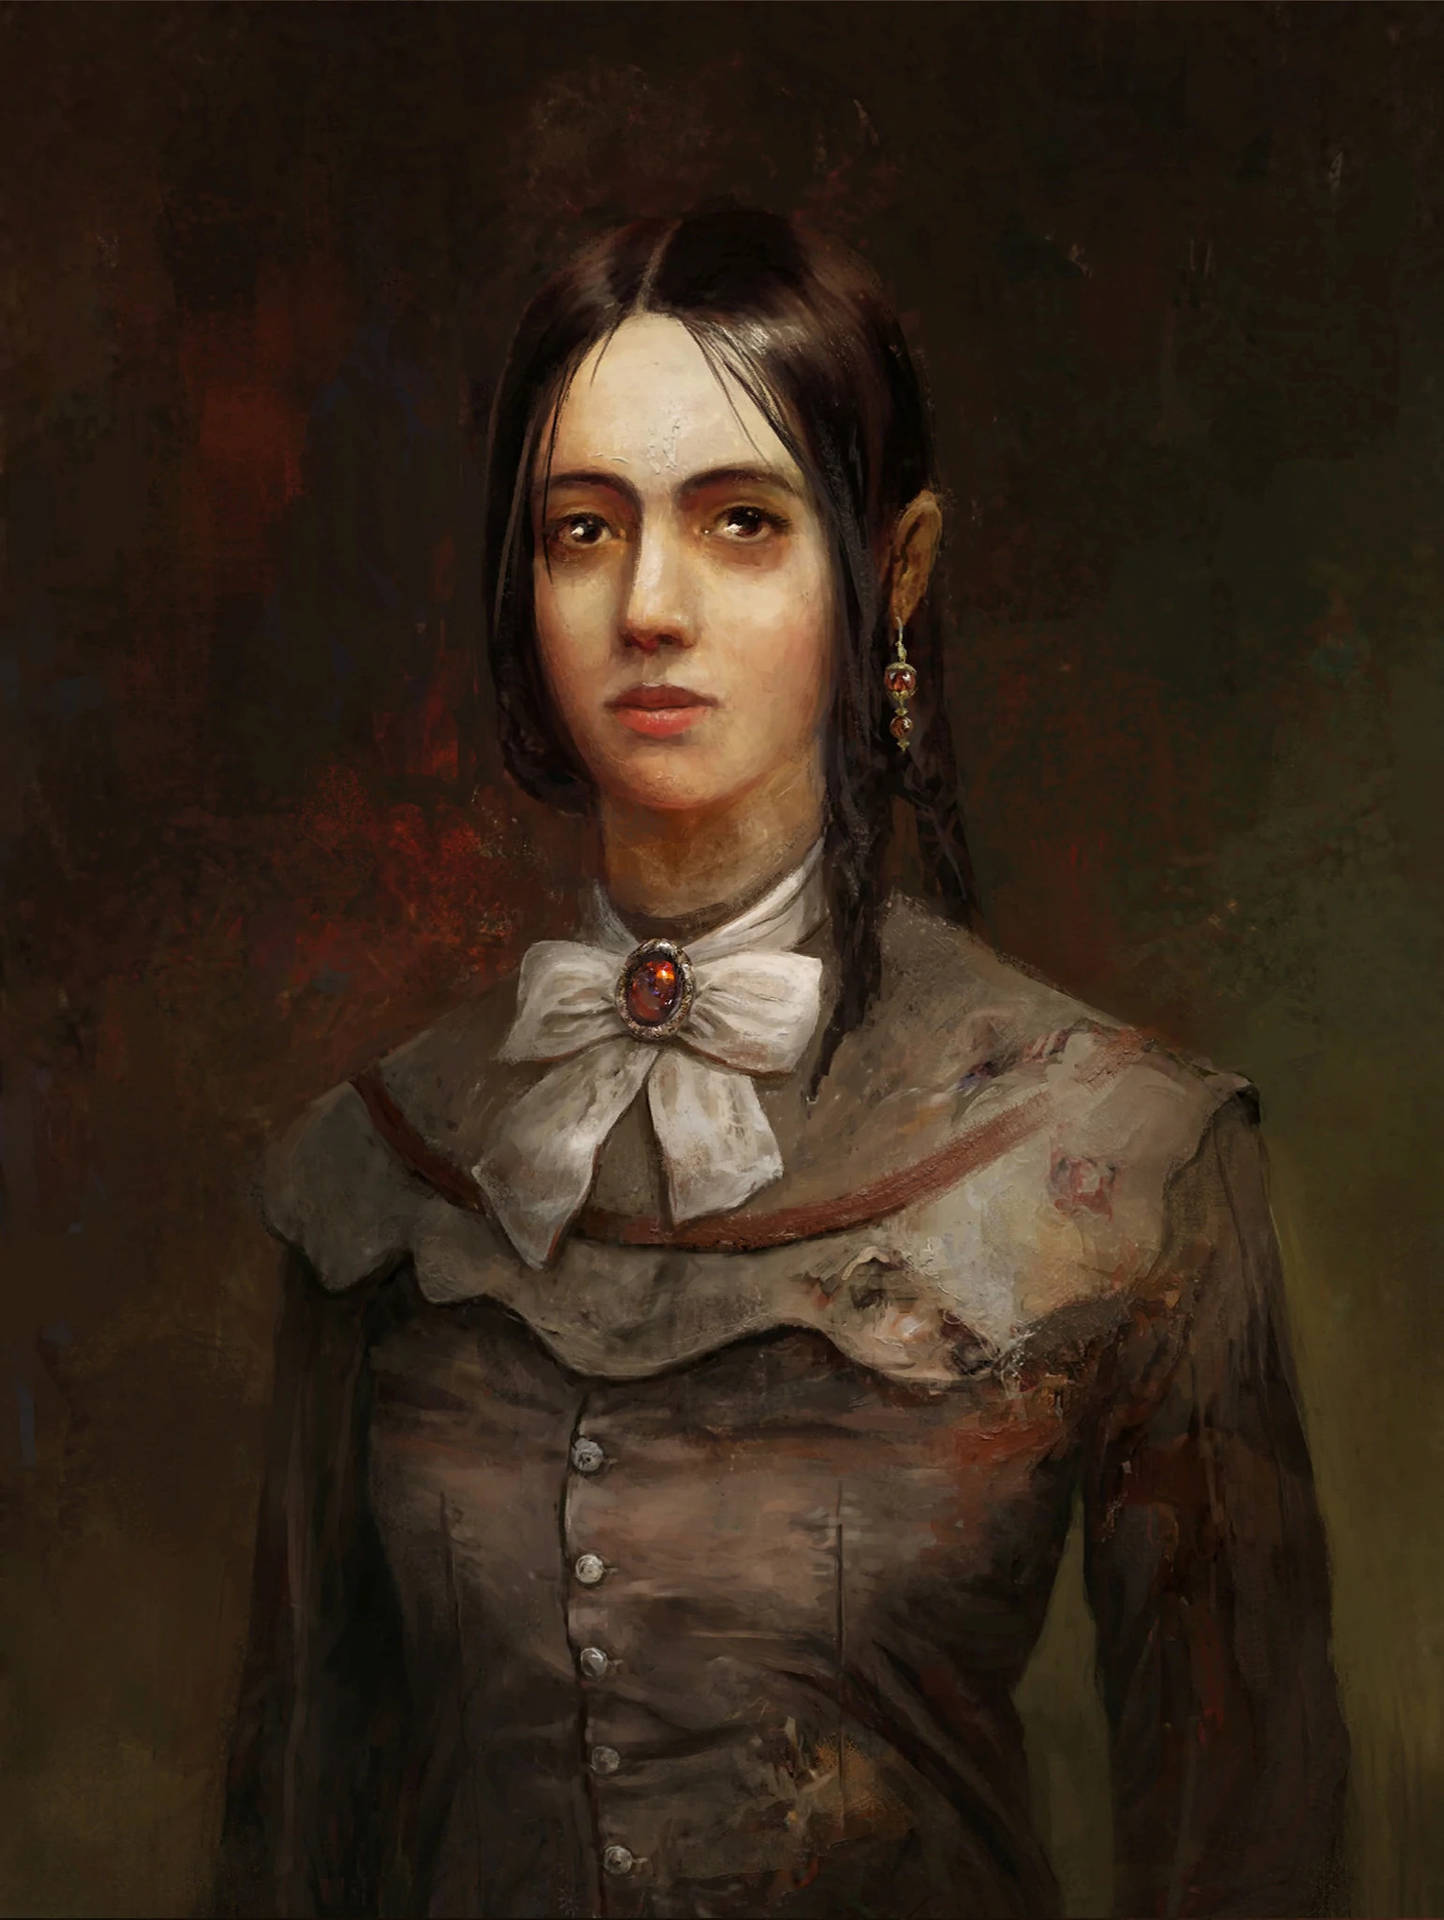 Caption: The Haunting Beauty In Layers Of Fear: 'the Wife'.